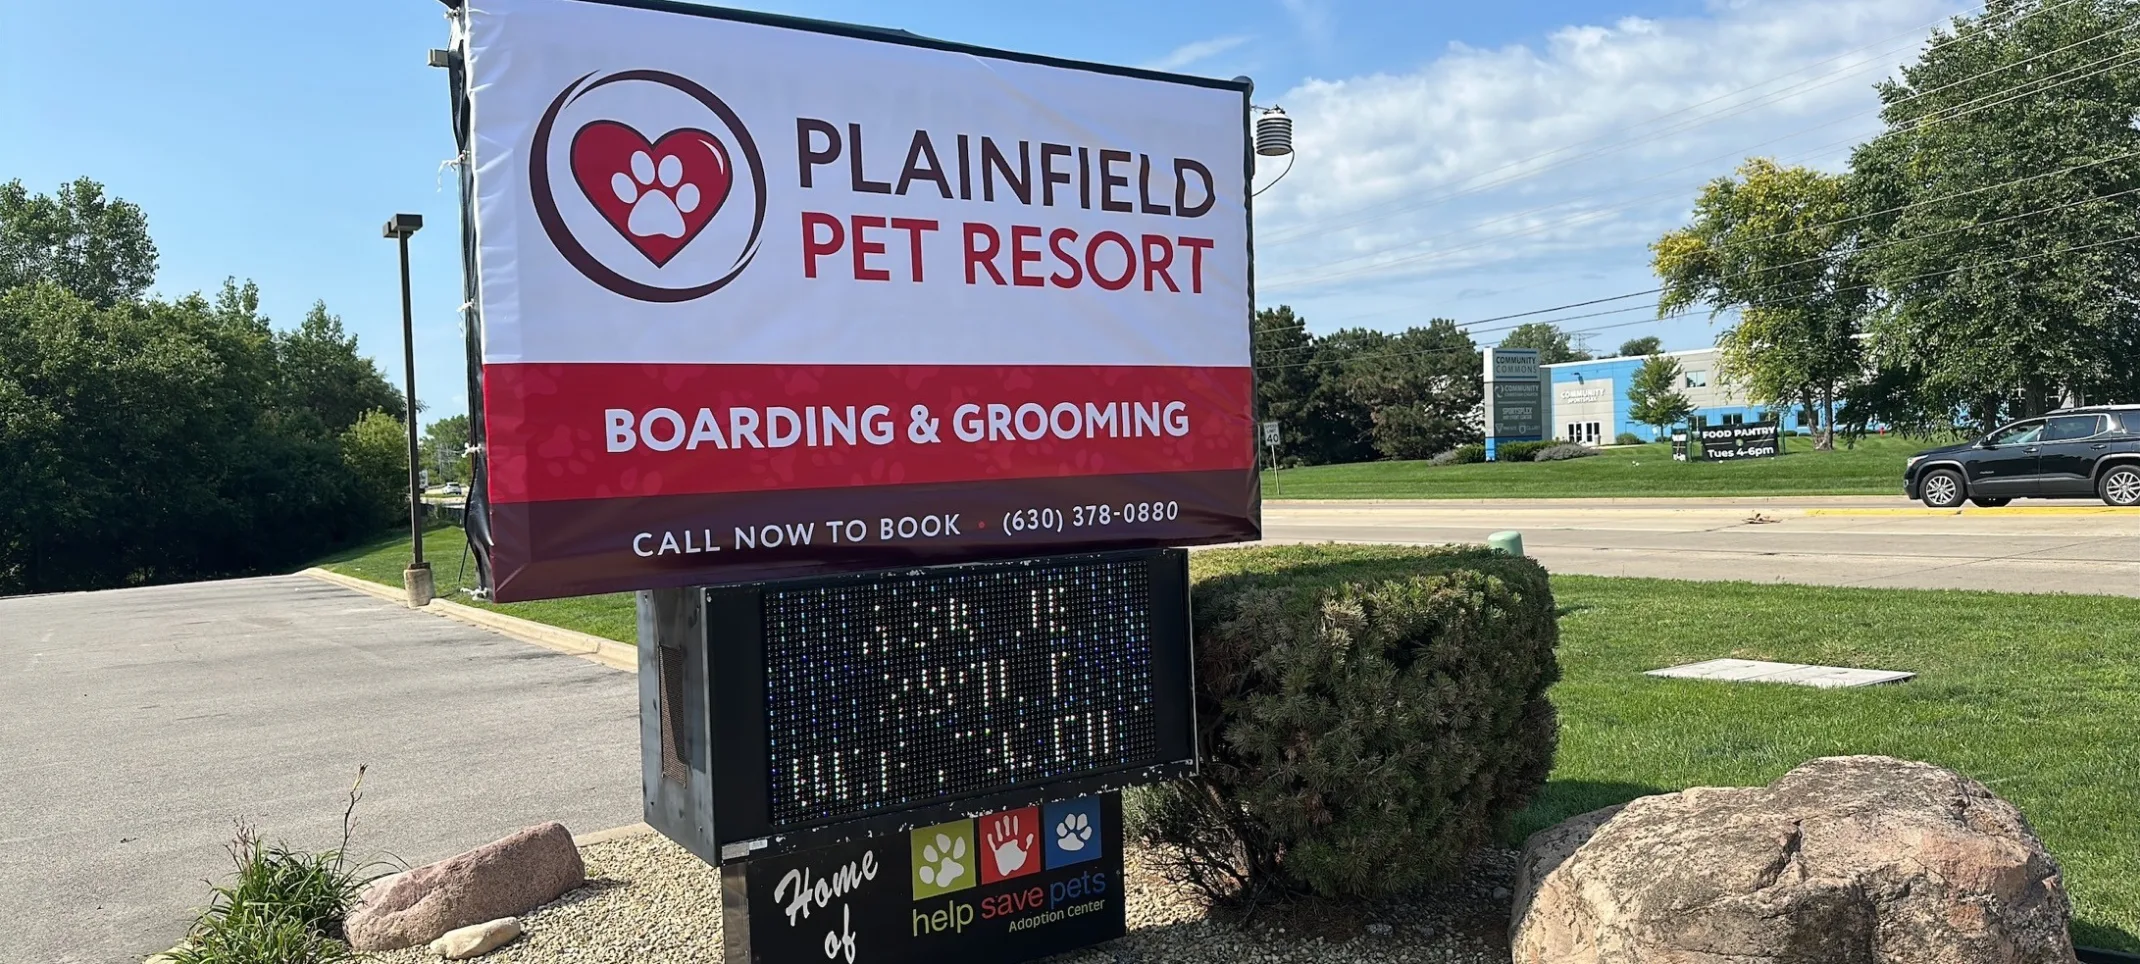 New Plainfield Pet Resort sign outside the current location